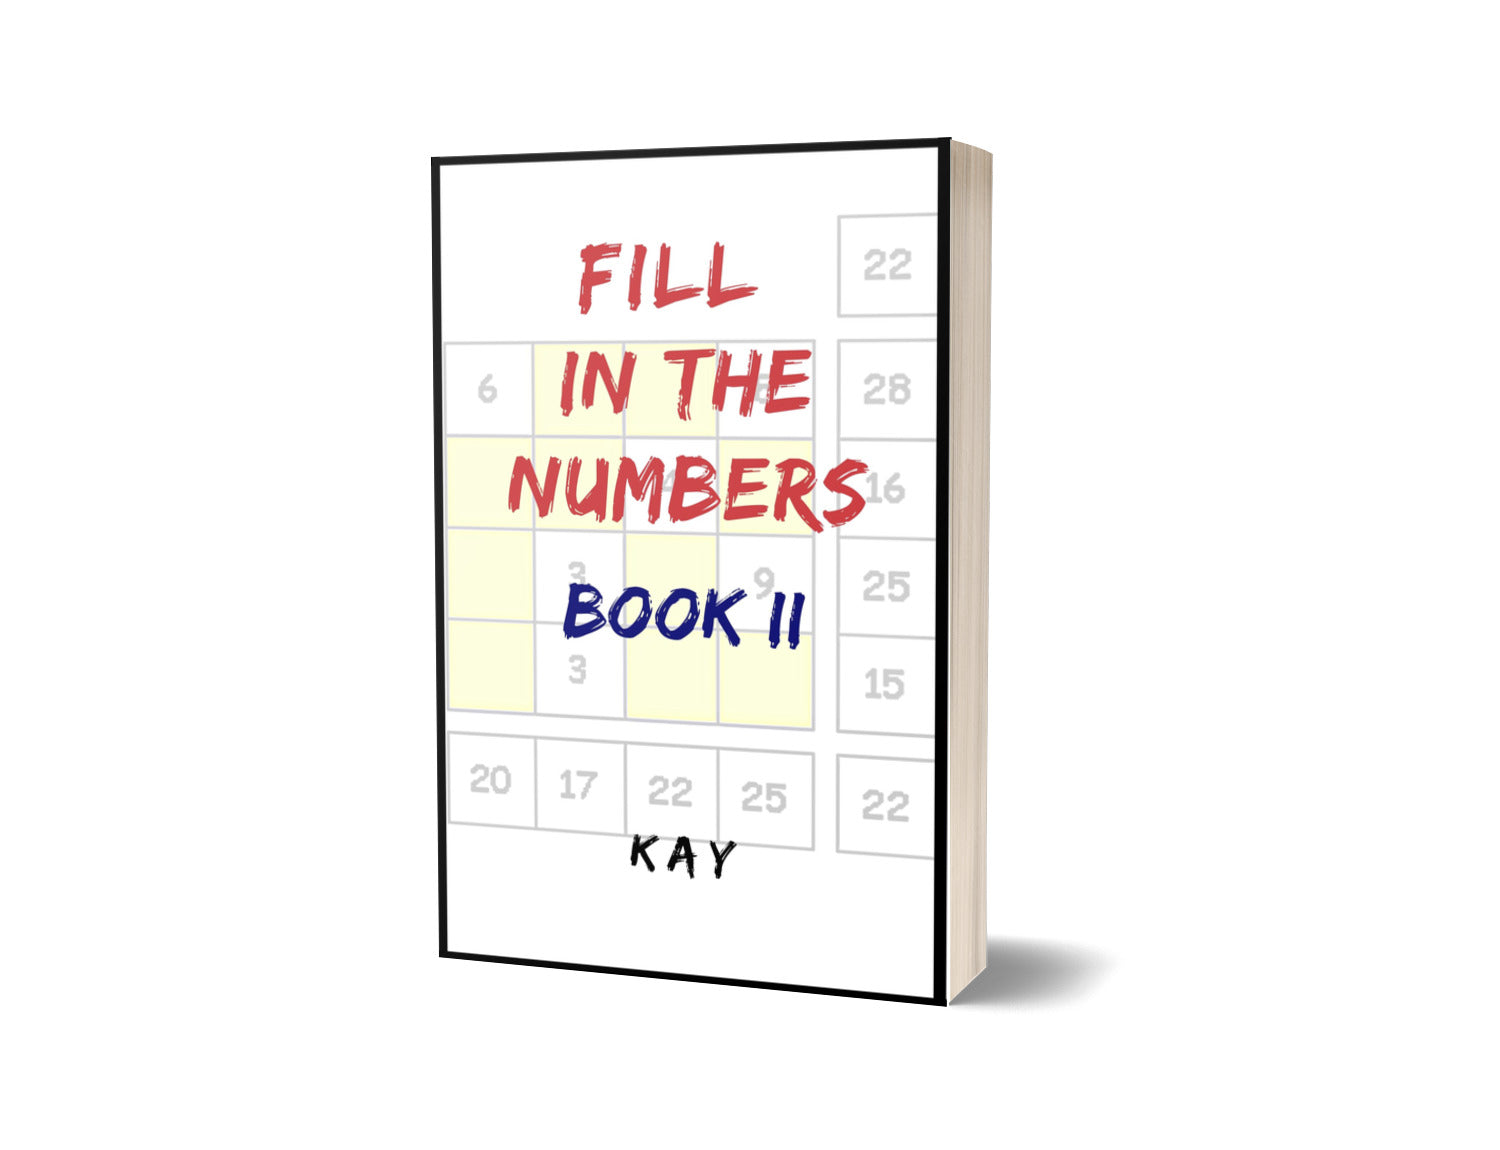 Fill in the Numbers Book II